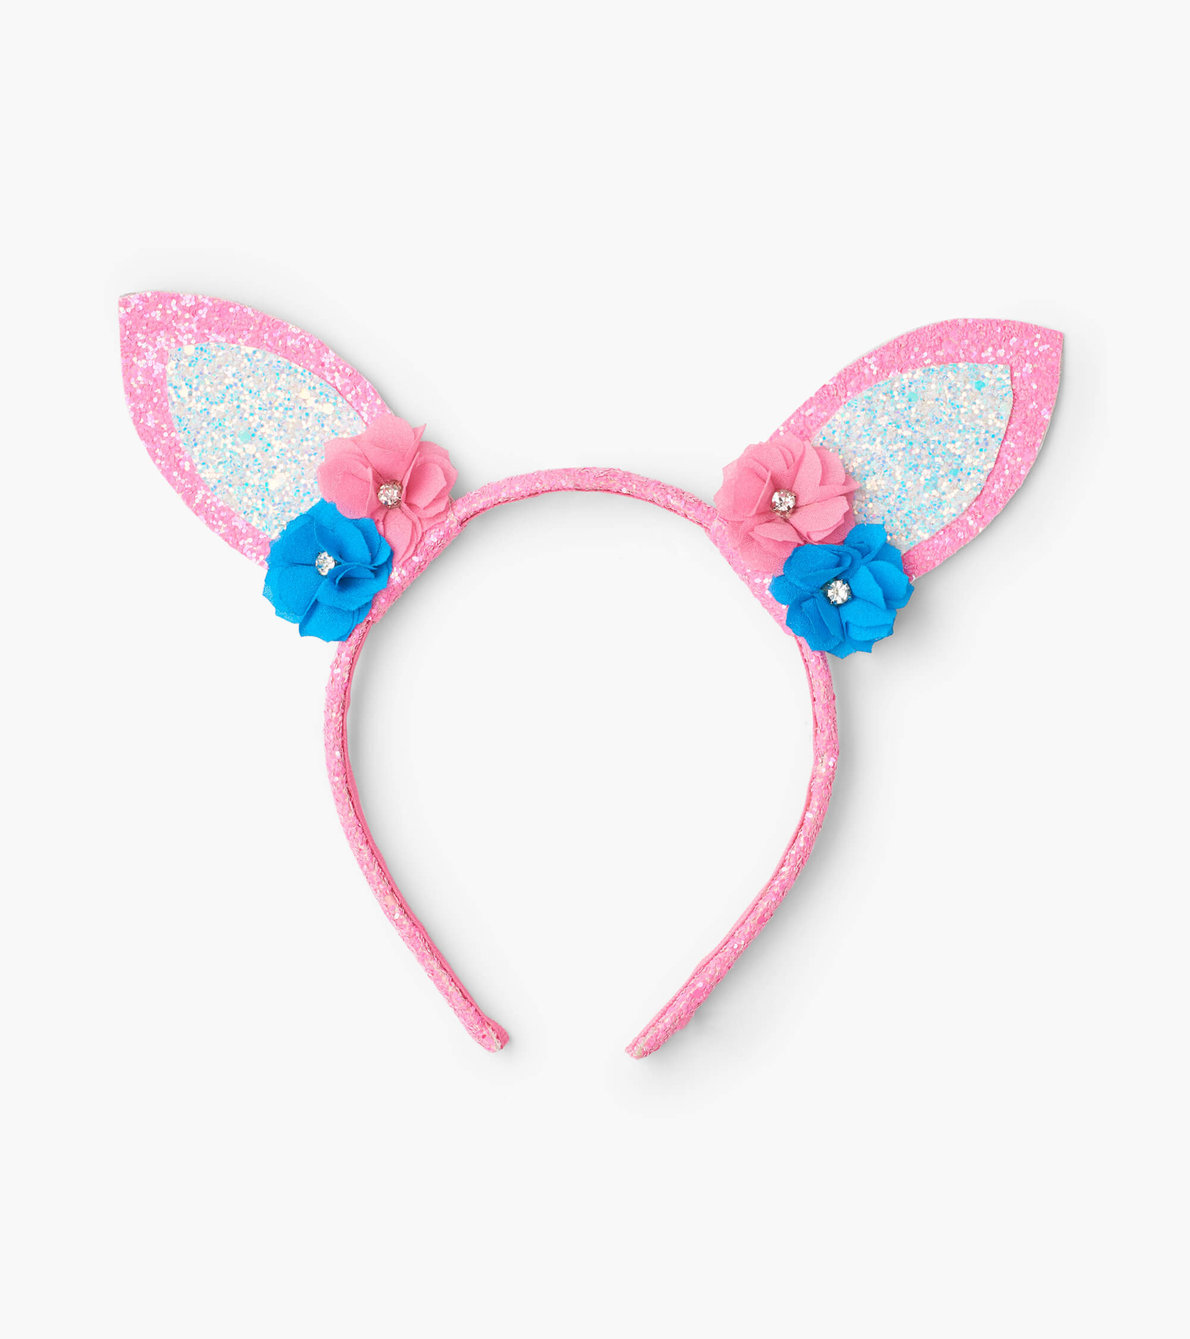 View larger image of Floral Bunny Ears Headband